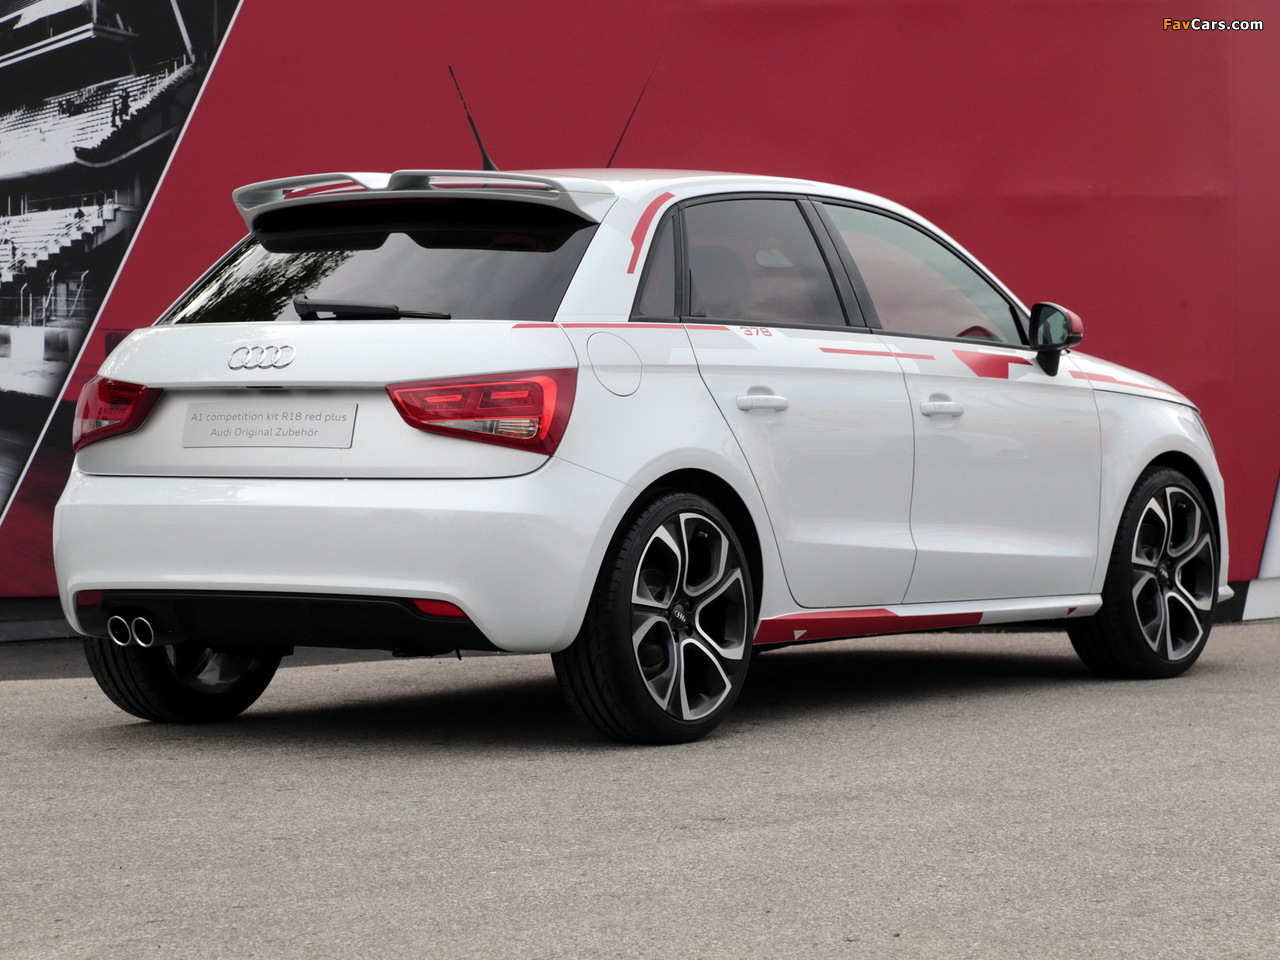 Audi A1 Sportback Competition Kit R18 Red Plus (8X) 2013 images (1280 x 960)